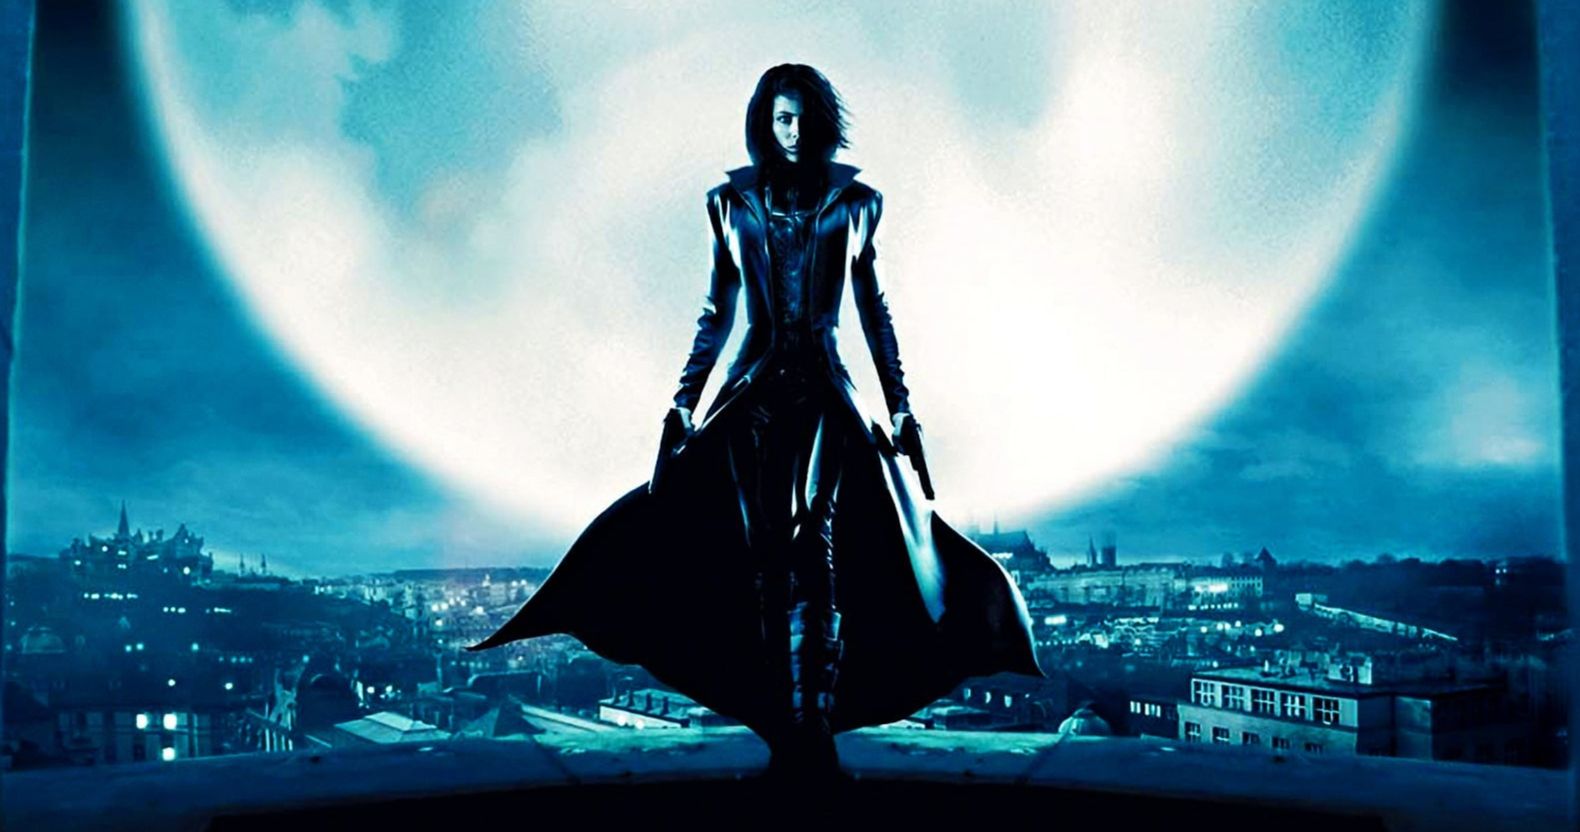 Underworld Hits DVD Packed with Special Features in January